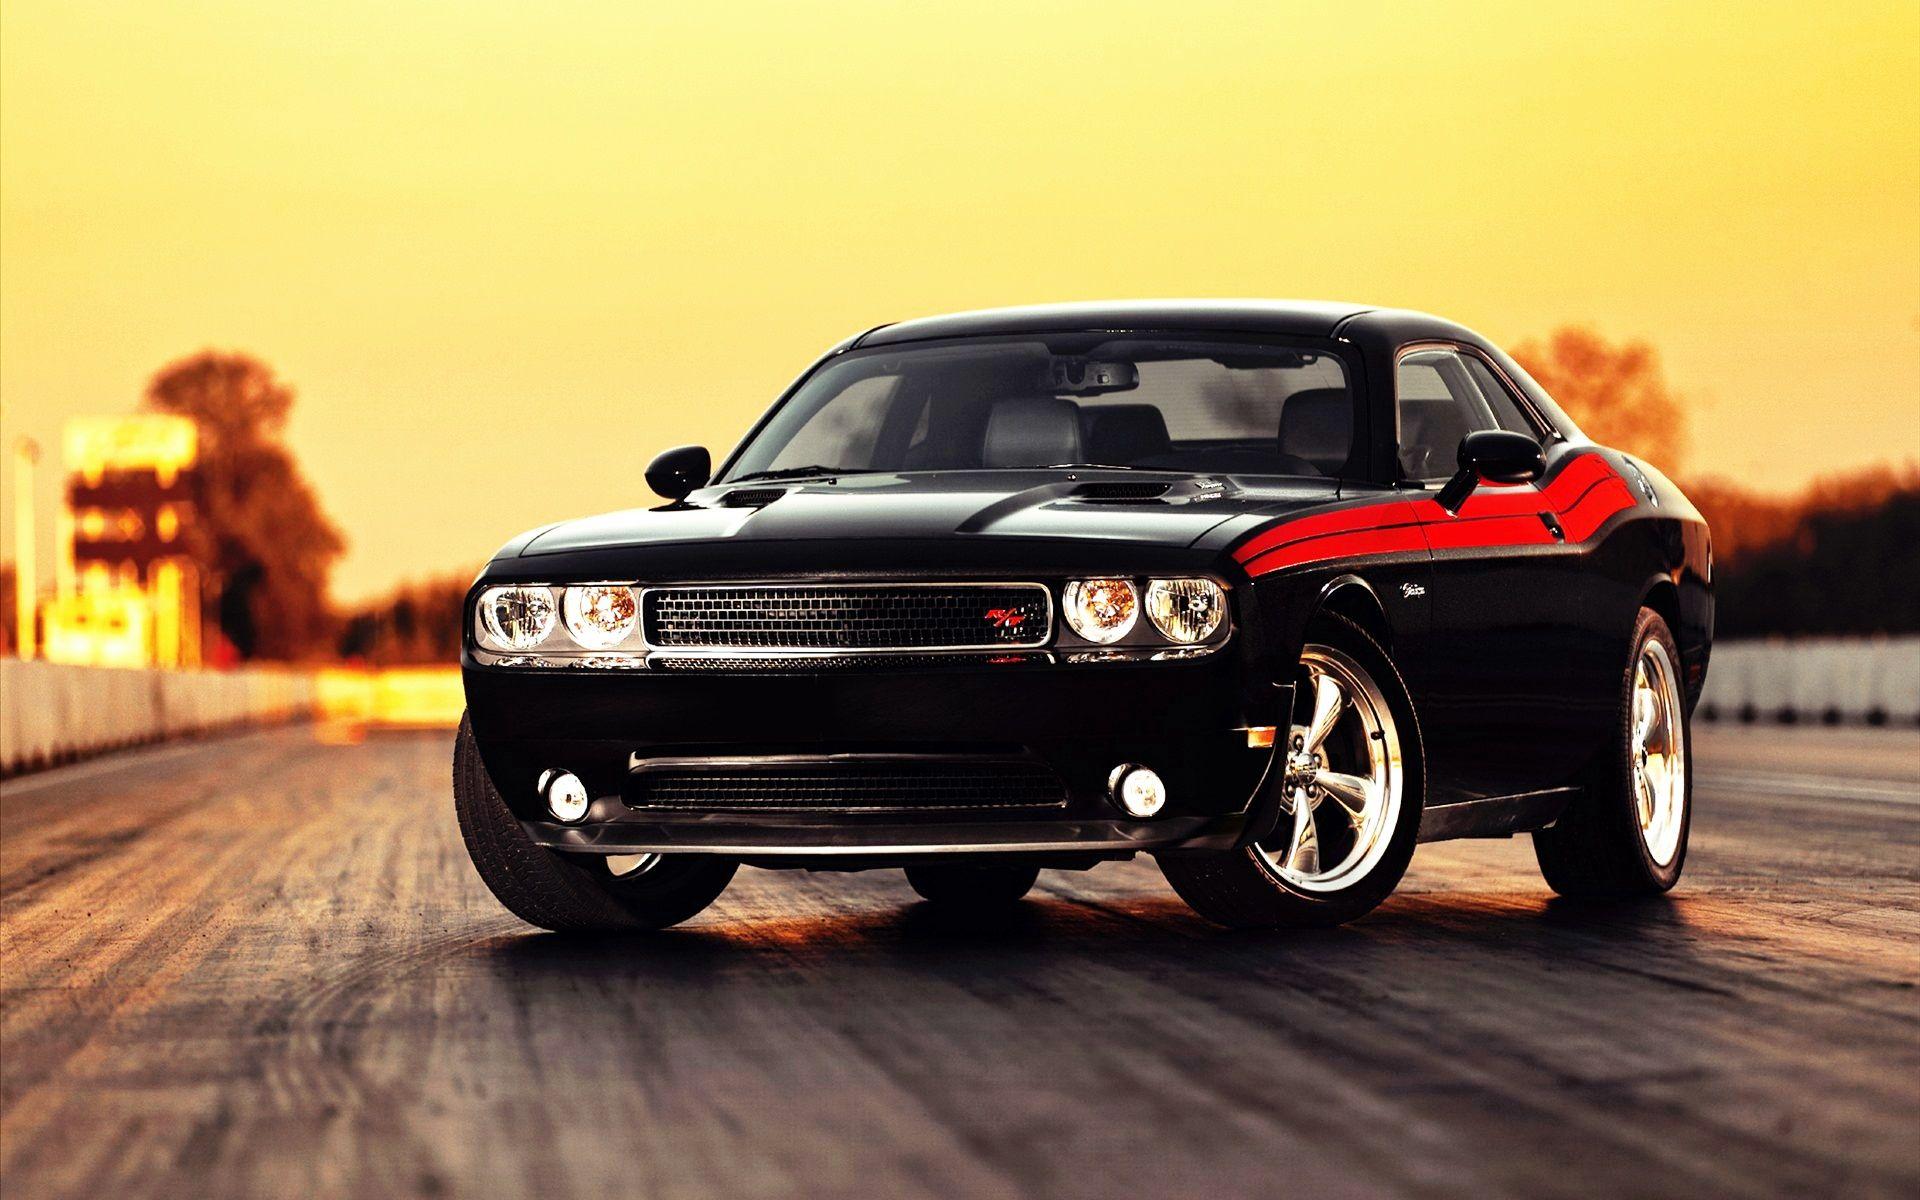 Super Dodge Car WallPapers In High Quality (HD)